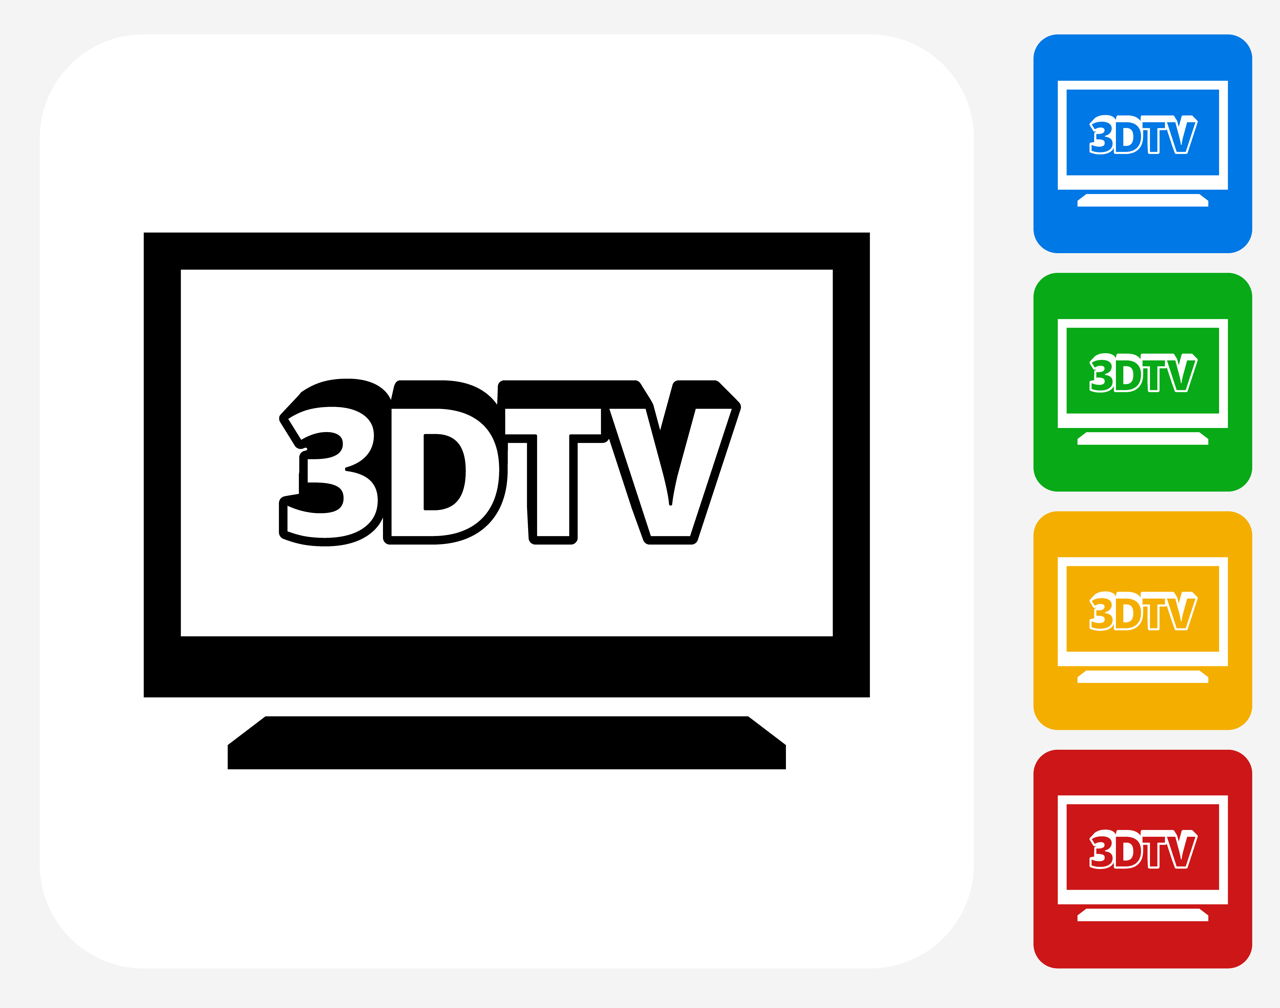 Watching 3D TV Could Be Harmful